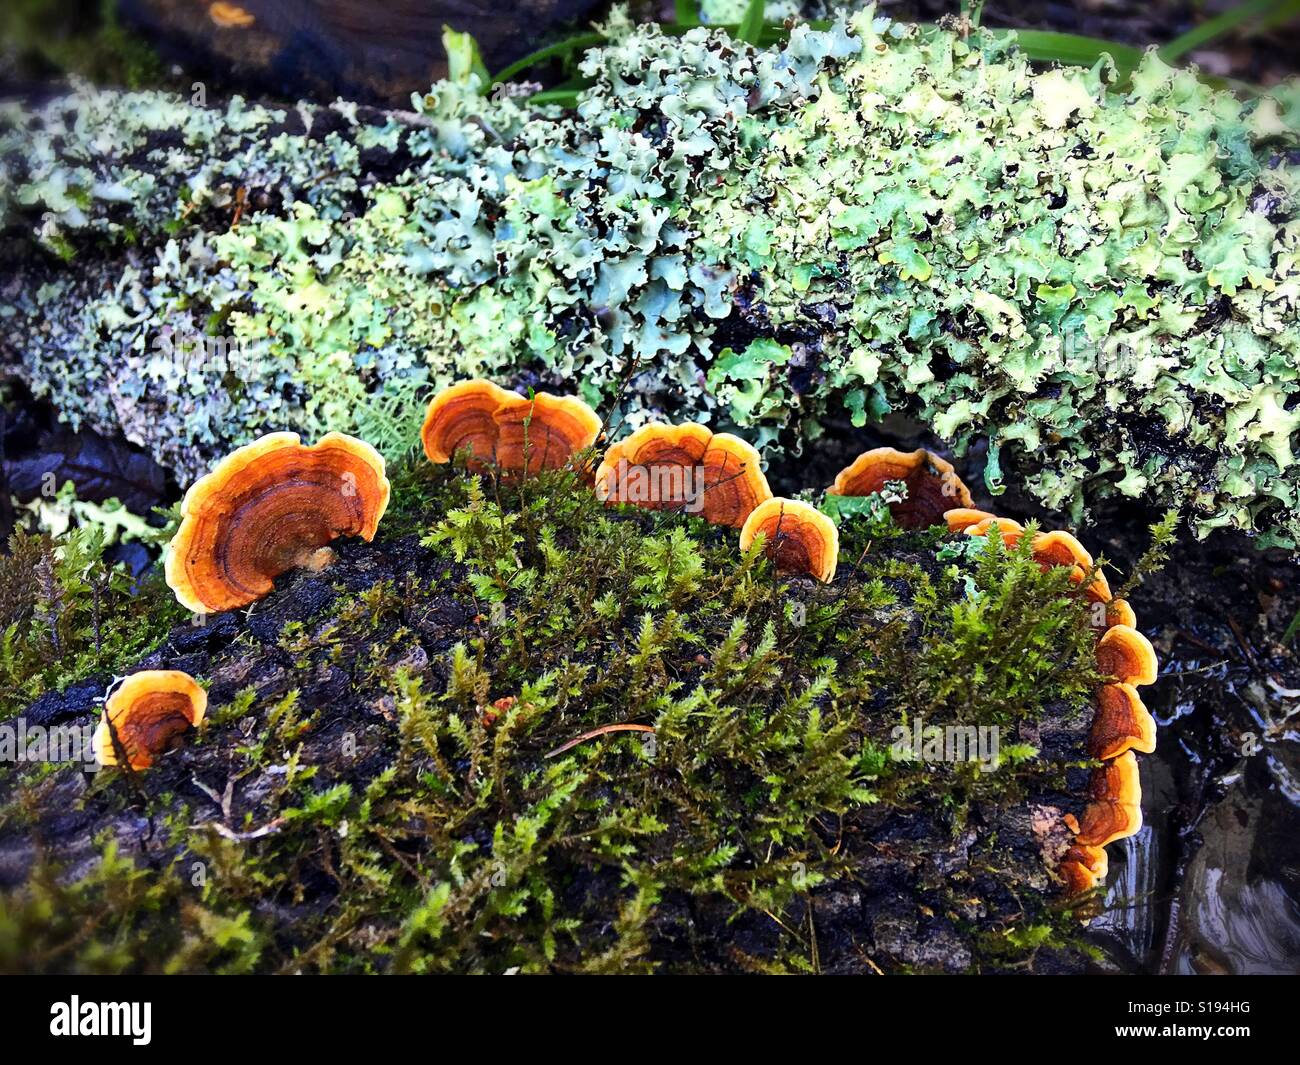 Moss and fungus growing on fallen trees in a forest in Northern California. Stock Photo